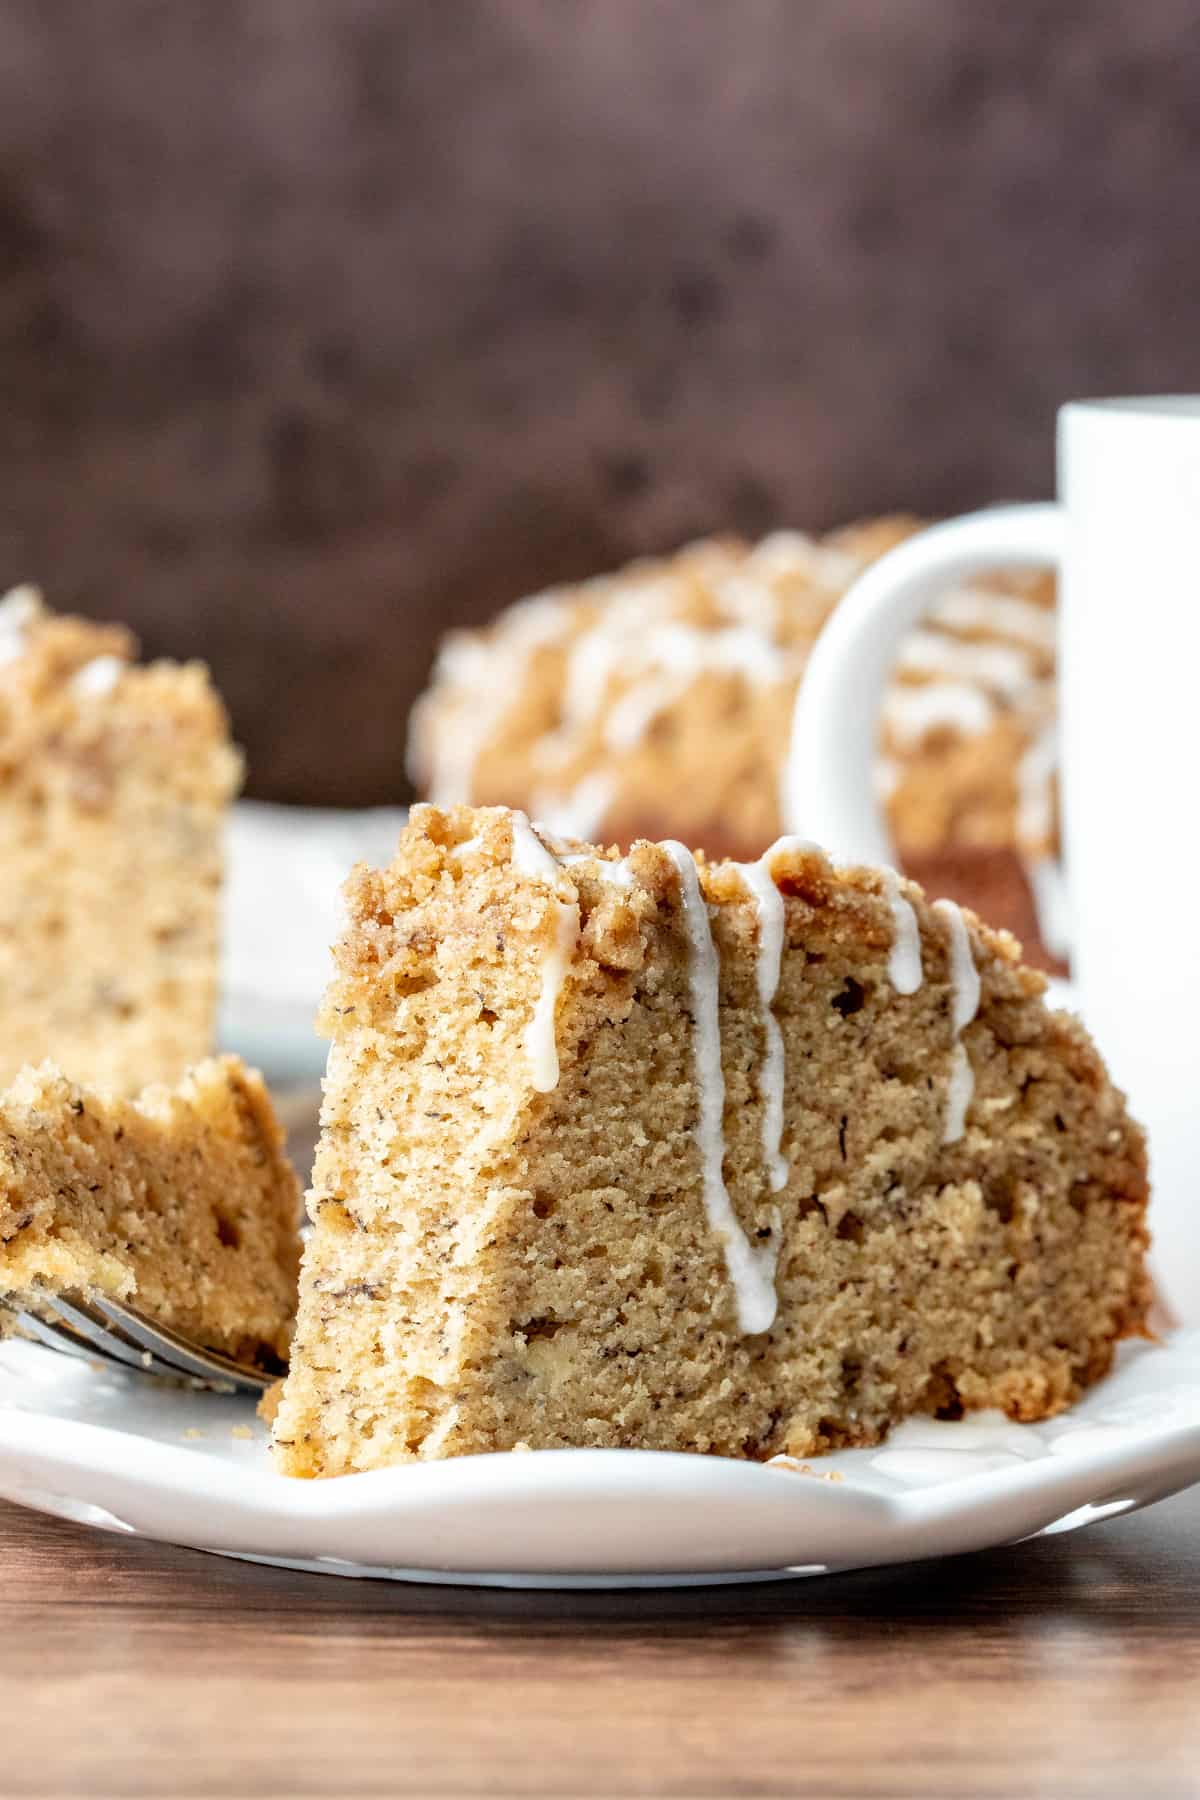 Slice of banana cake with streusel topping with bite taken out